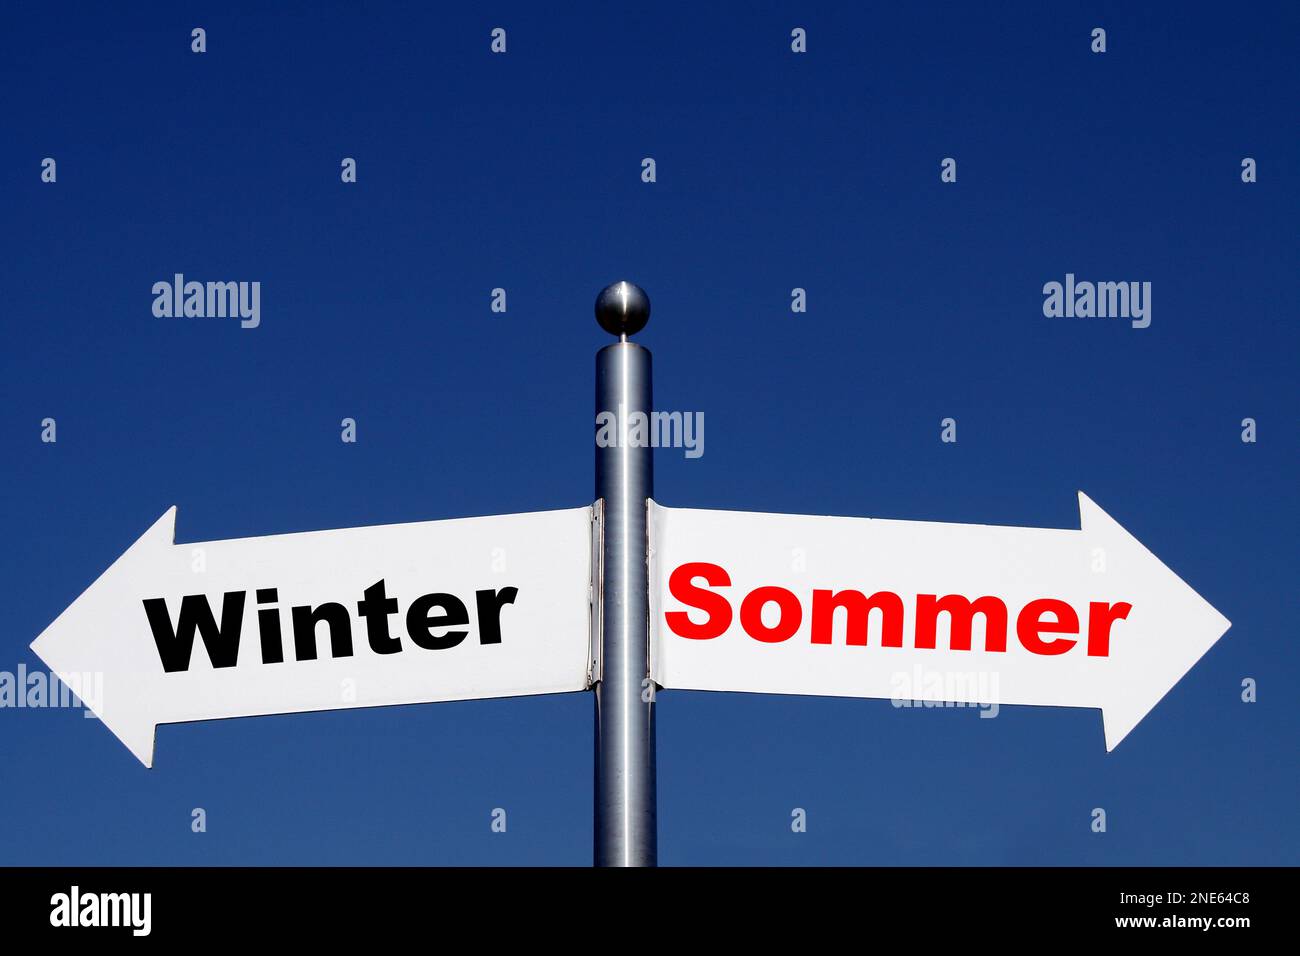 signposts pointing in different directions, options winter - summer Stock Photo